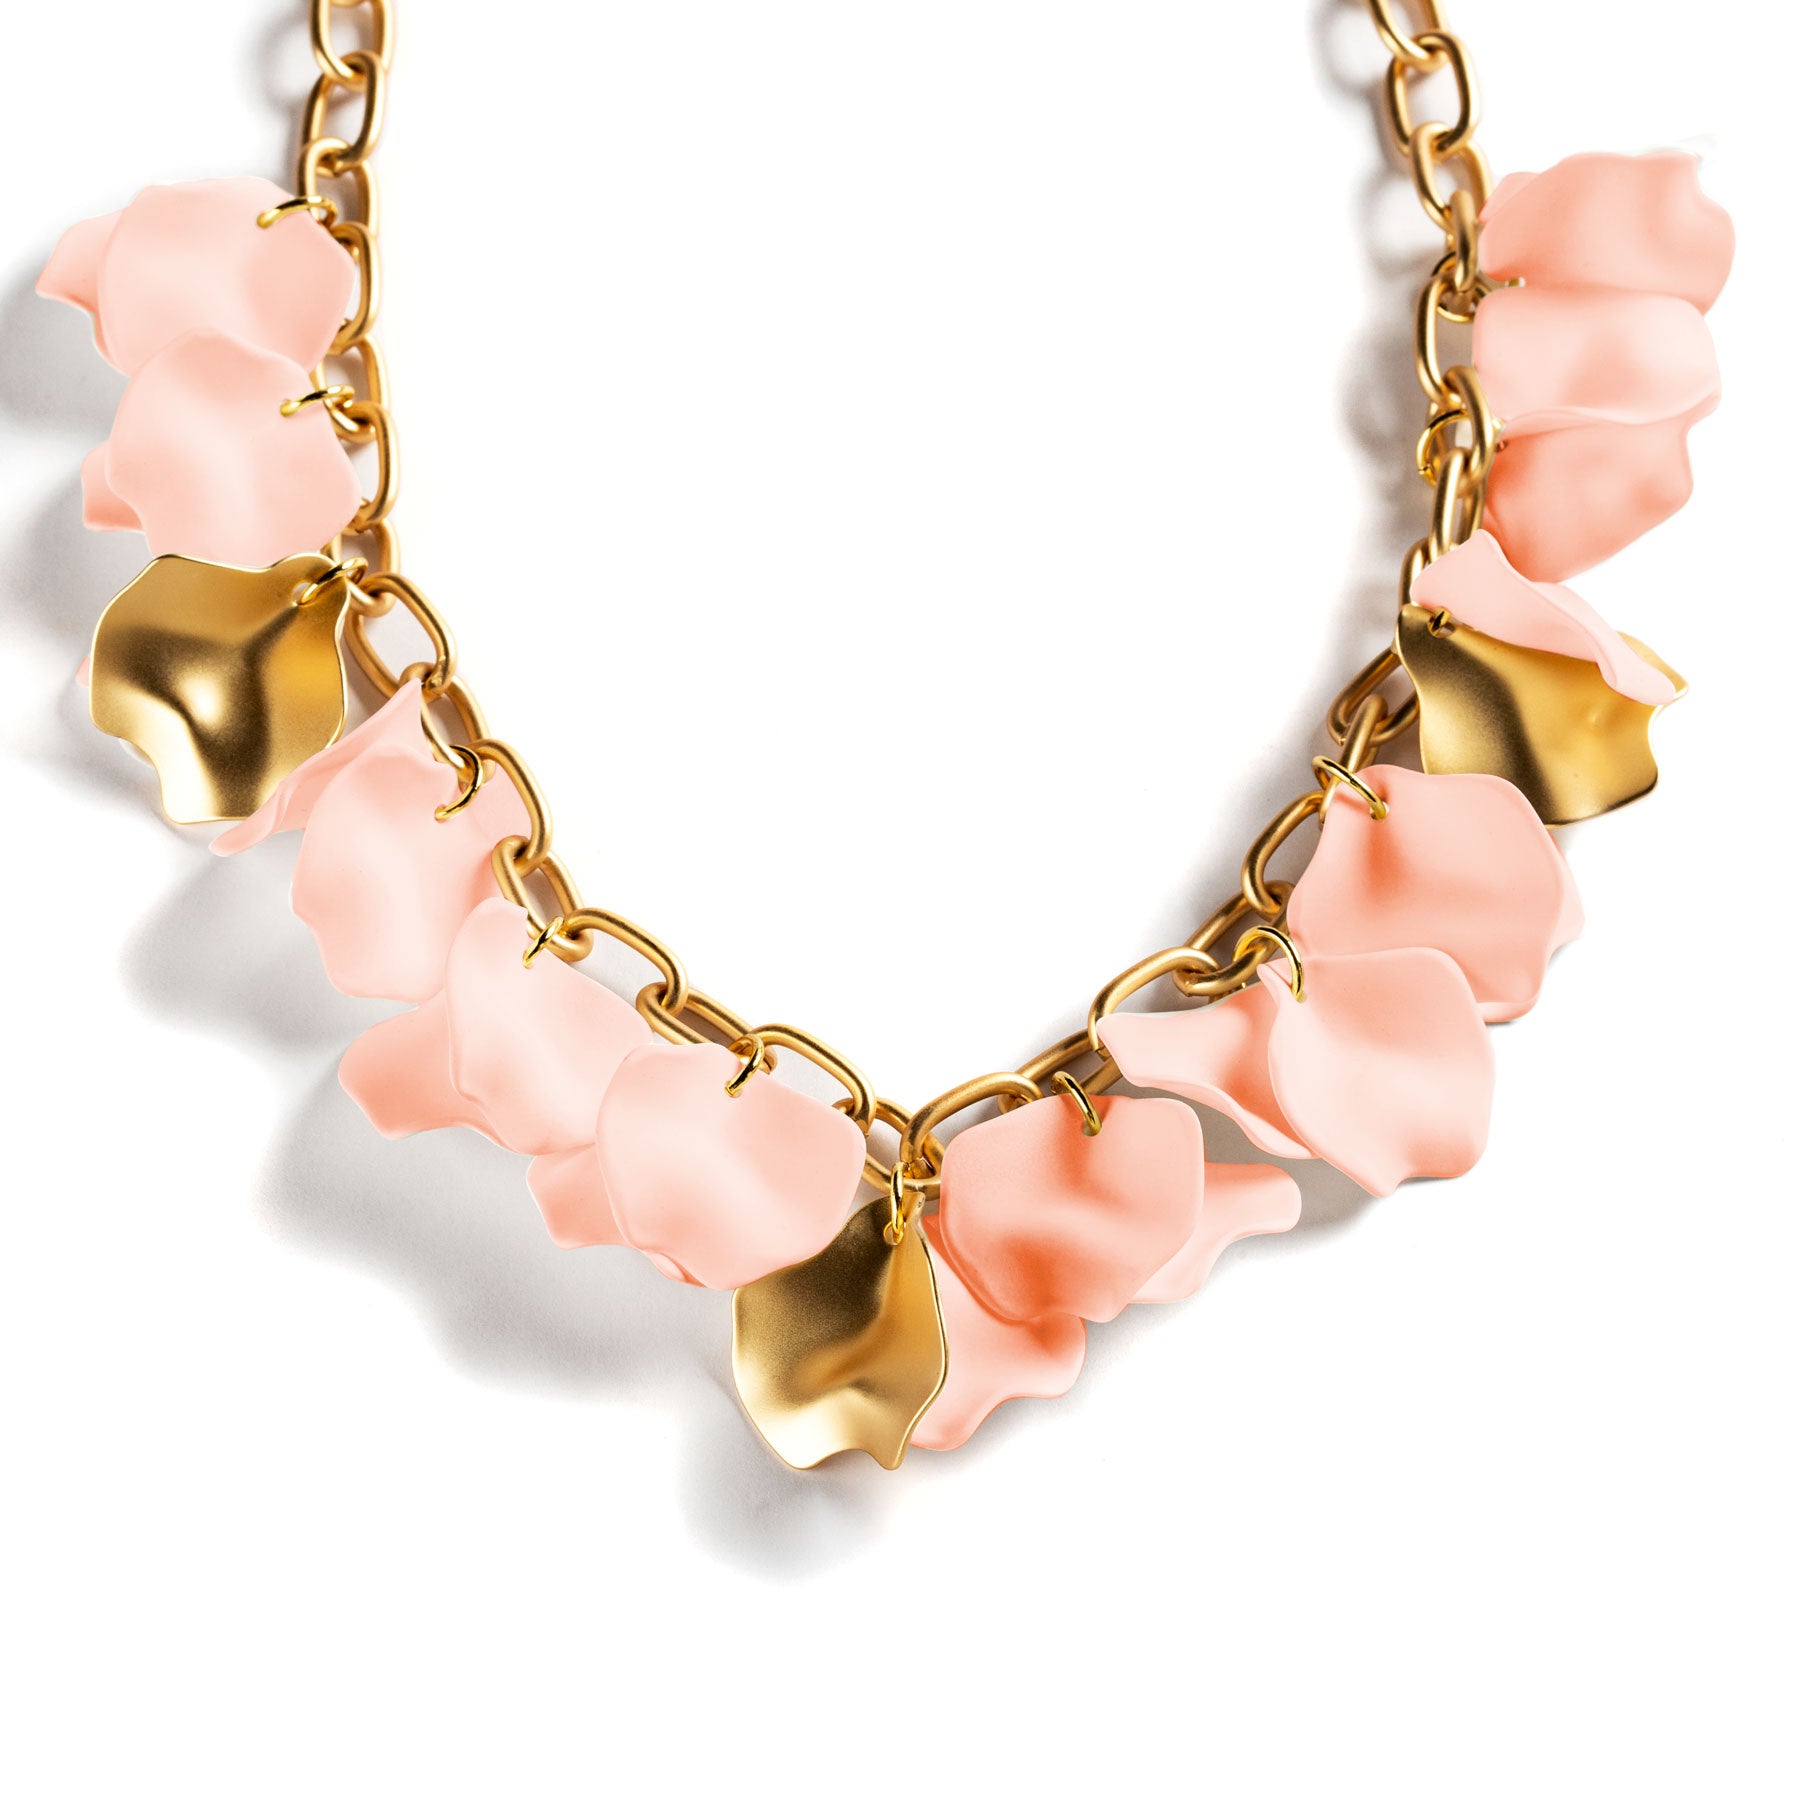 GOLDEN METAL PETAL NECKLACE PINK AND GOLD COLOR HAND PAINTED